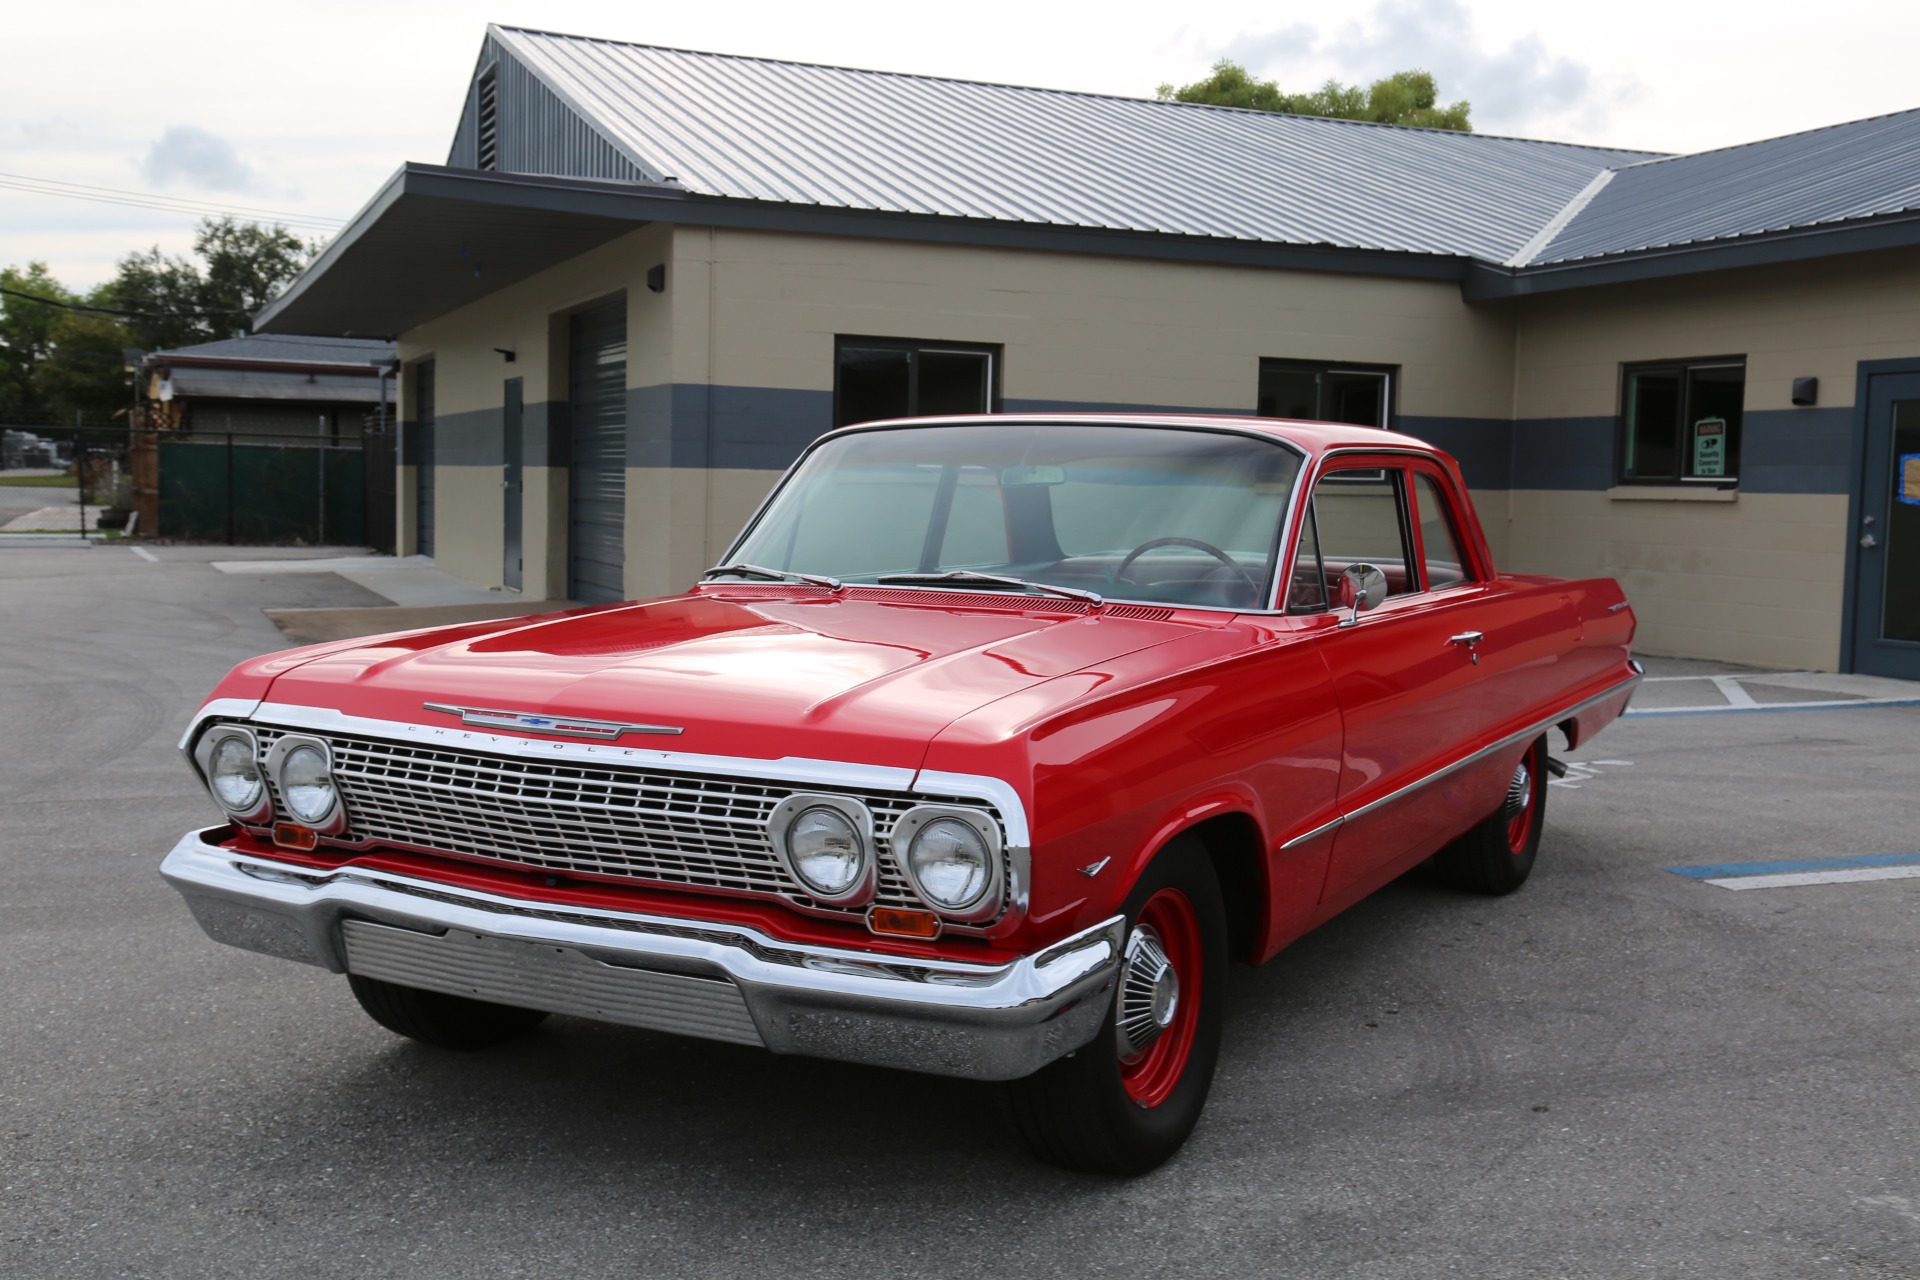 Used 1963 Chevrolet Belair 2 Dr V8 Auto for sale Sold at Muscle Cars for Sale Inc. in Fort Myers FL 33912 6